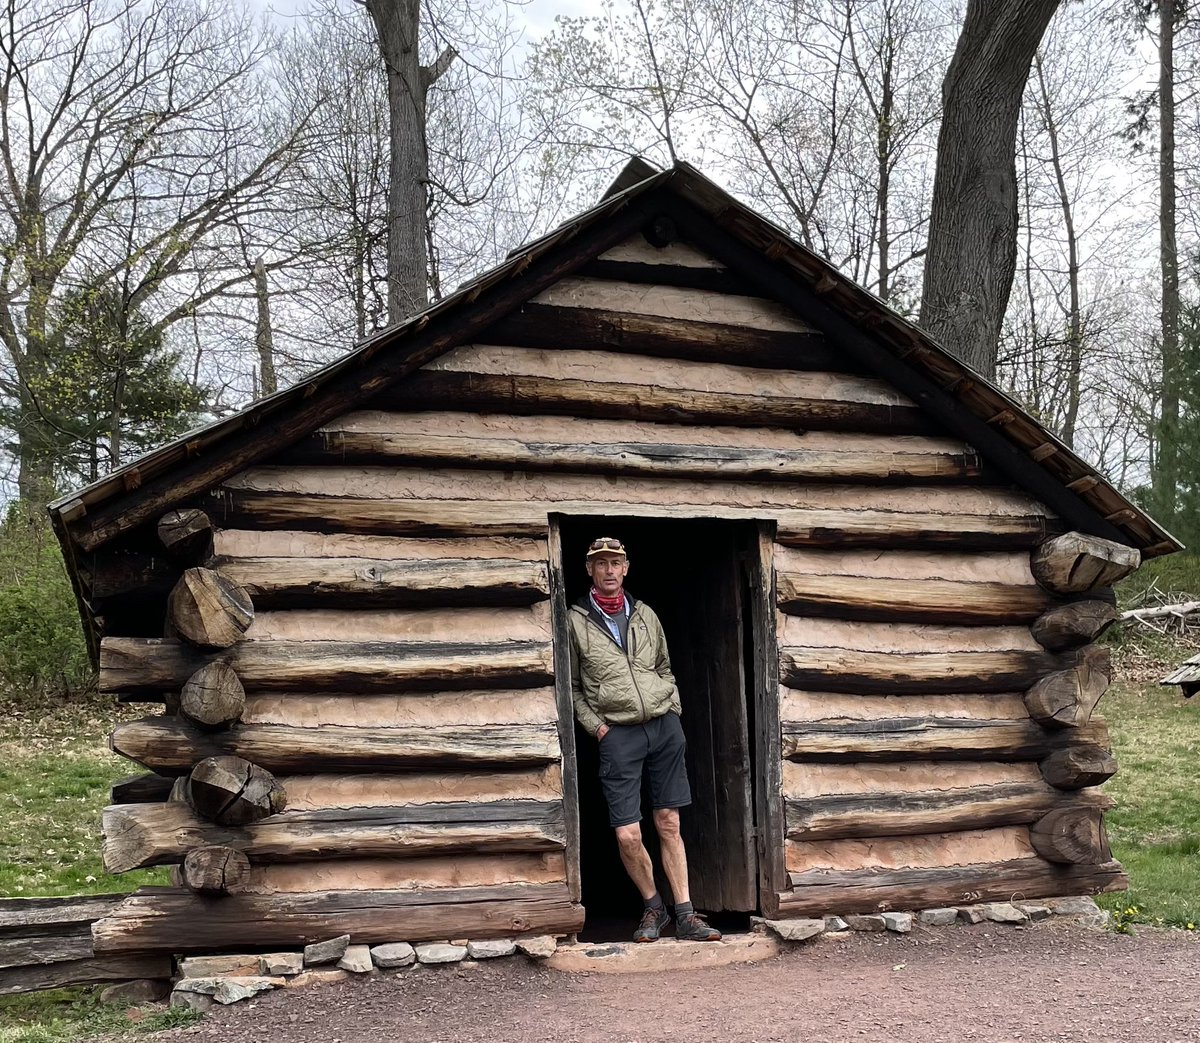 Washington did not sleep here. Nor did his troops. This 12-man hut was built in the 1950s as part of the long effort to re-create and remember a single winter at a place called Valley Forge in 1777. Interesting thing is—and there are many of them—they have never found the Forge..